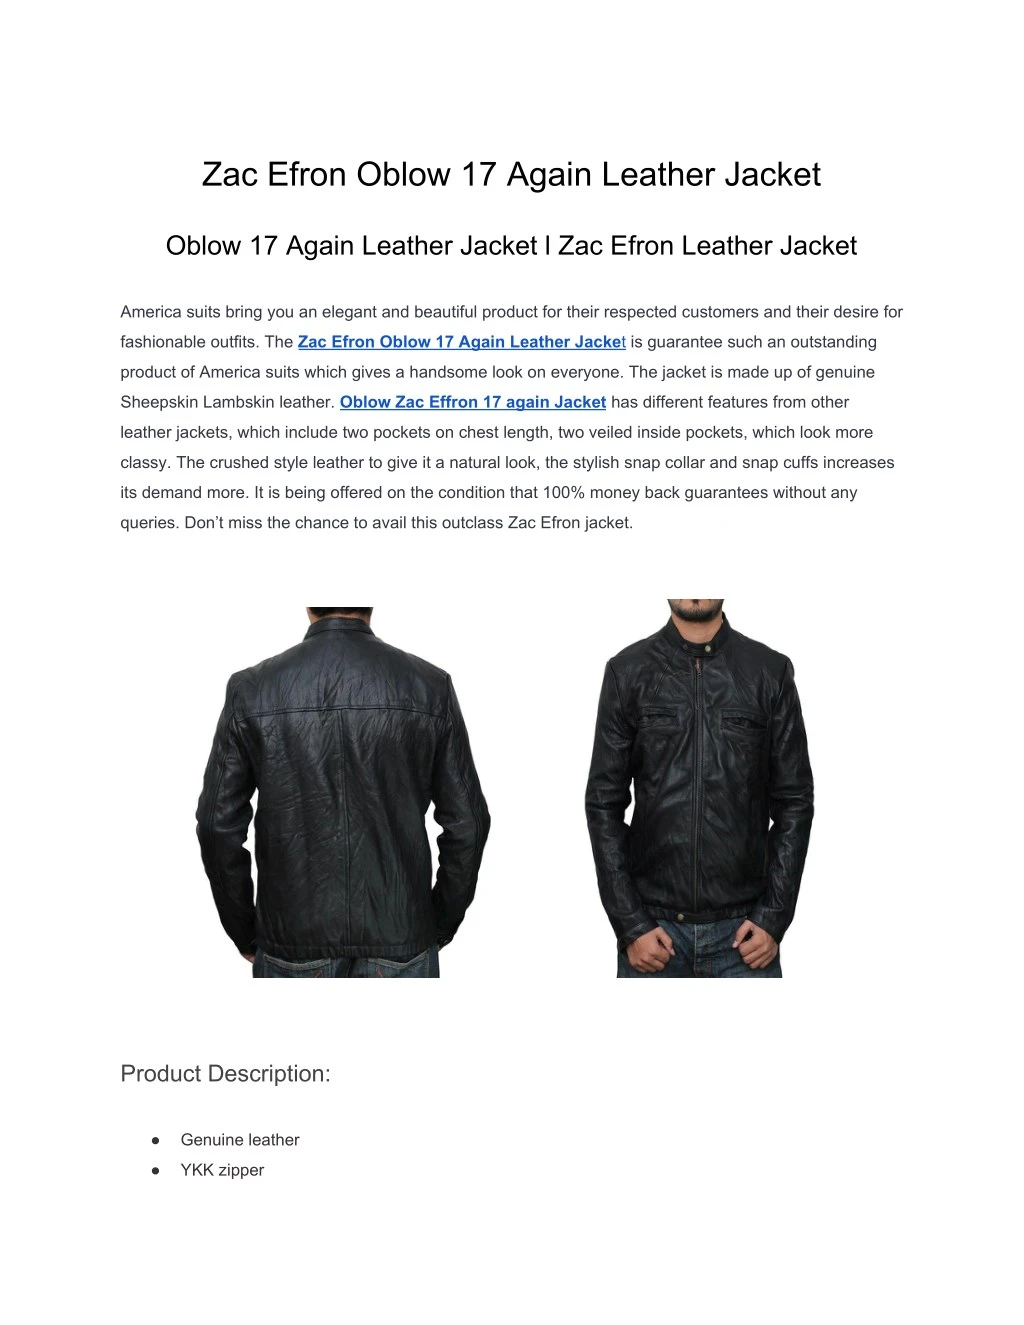 PPT - Zac Efron Oblow 17 Again Leather Jacket.pdf PowerPoint ...